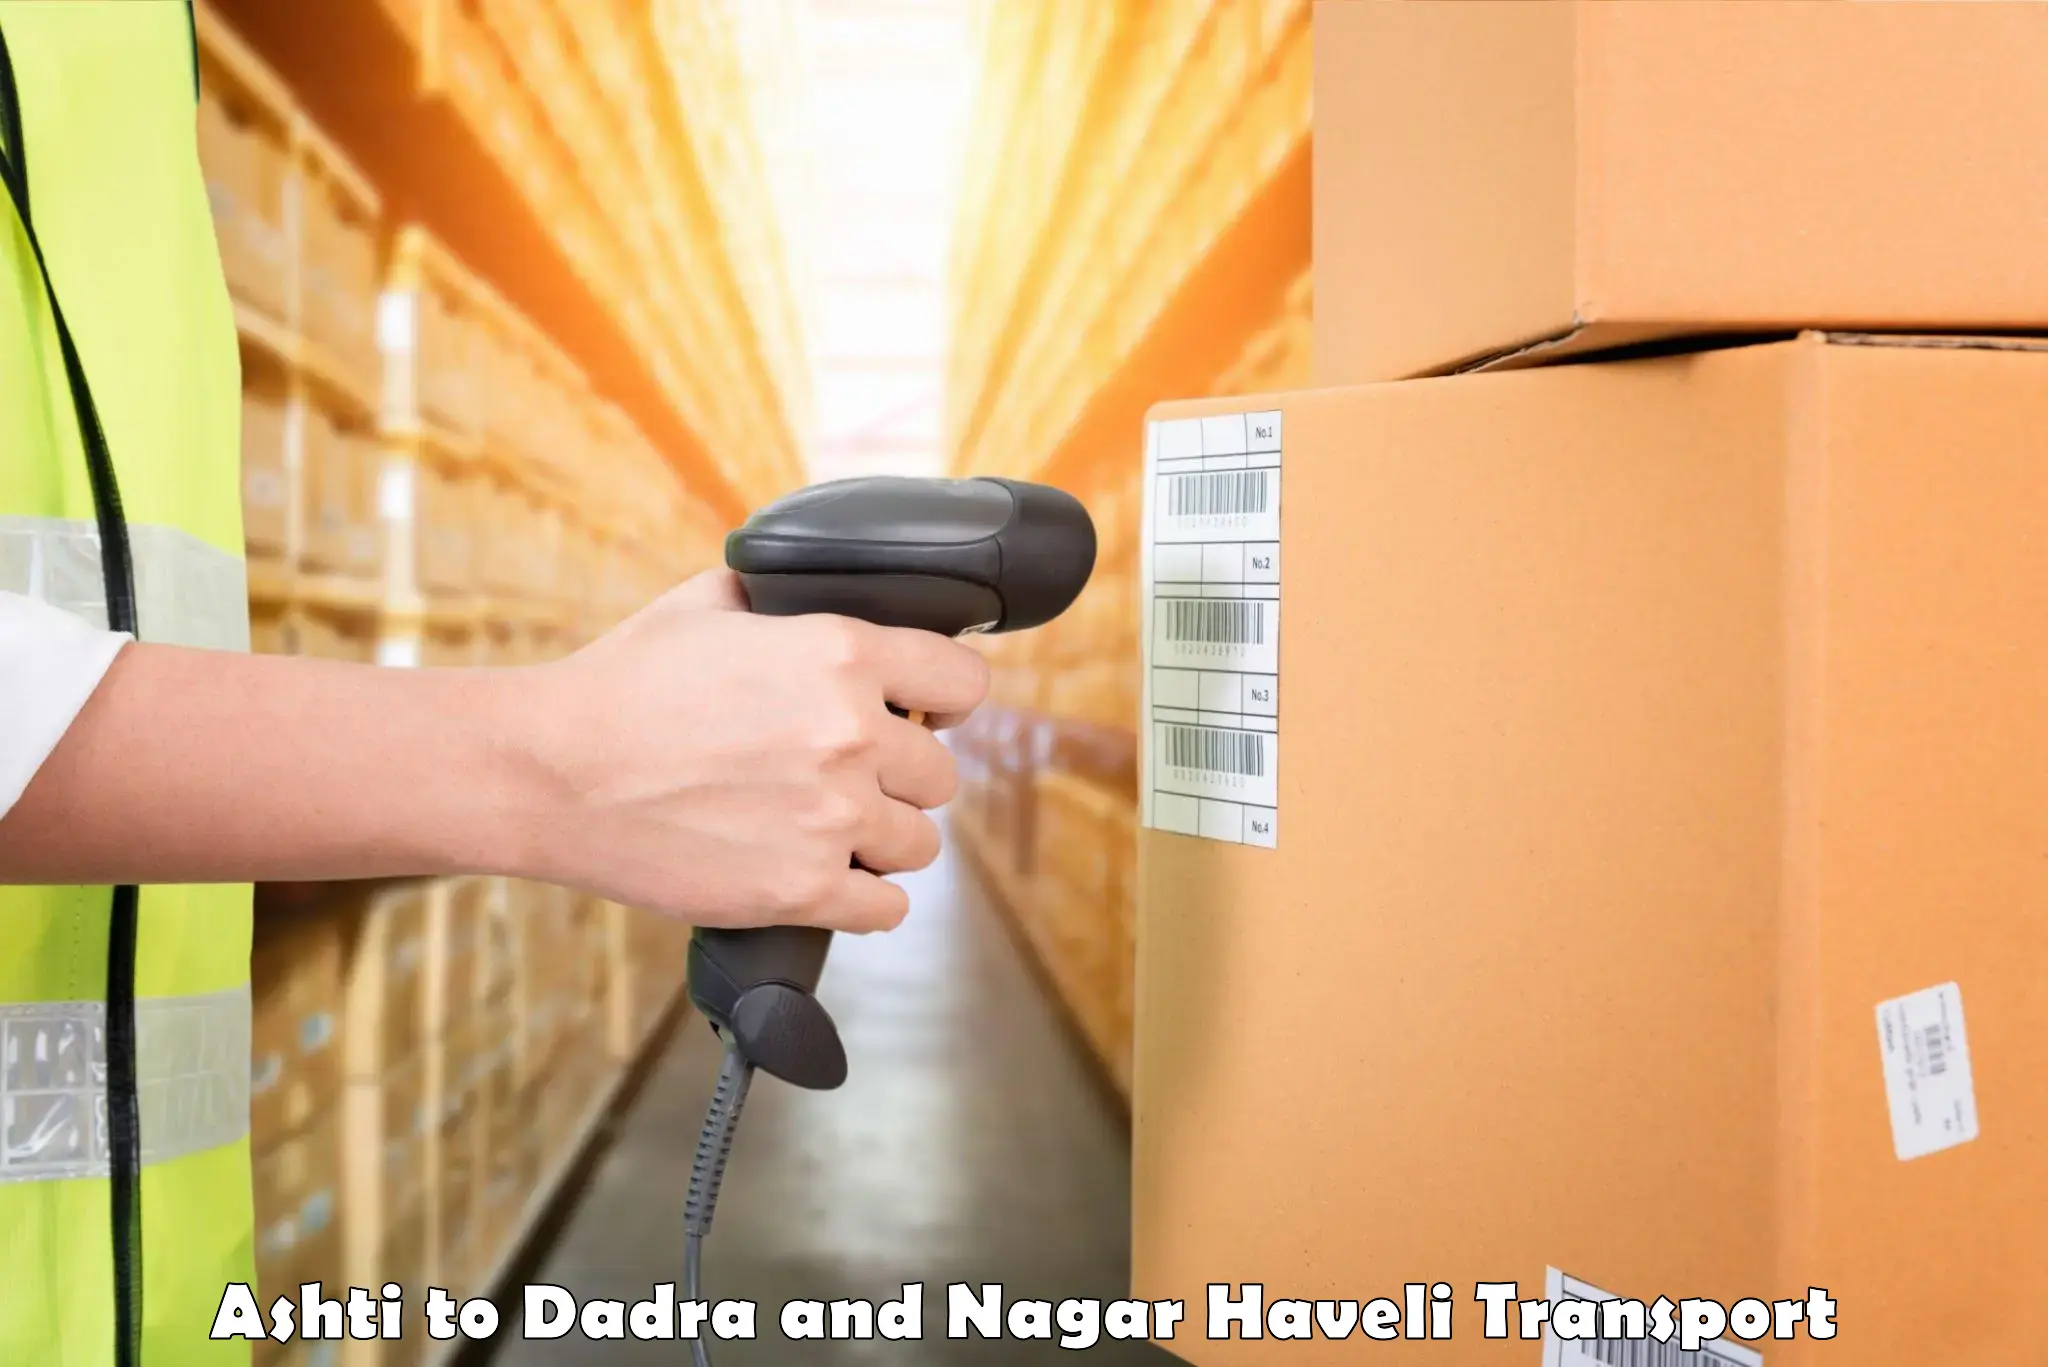 Container transportation services in Ashti to Dadra and Nagar Haveli